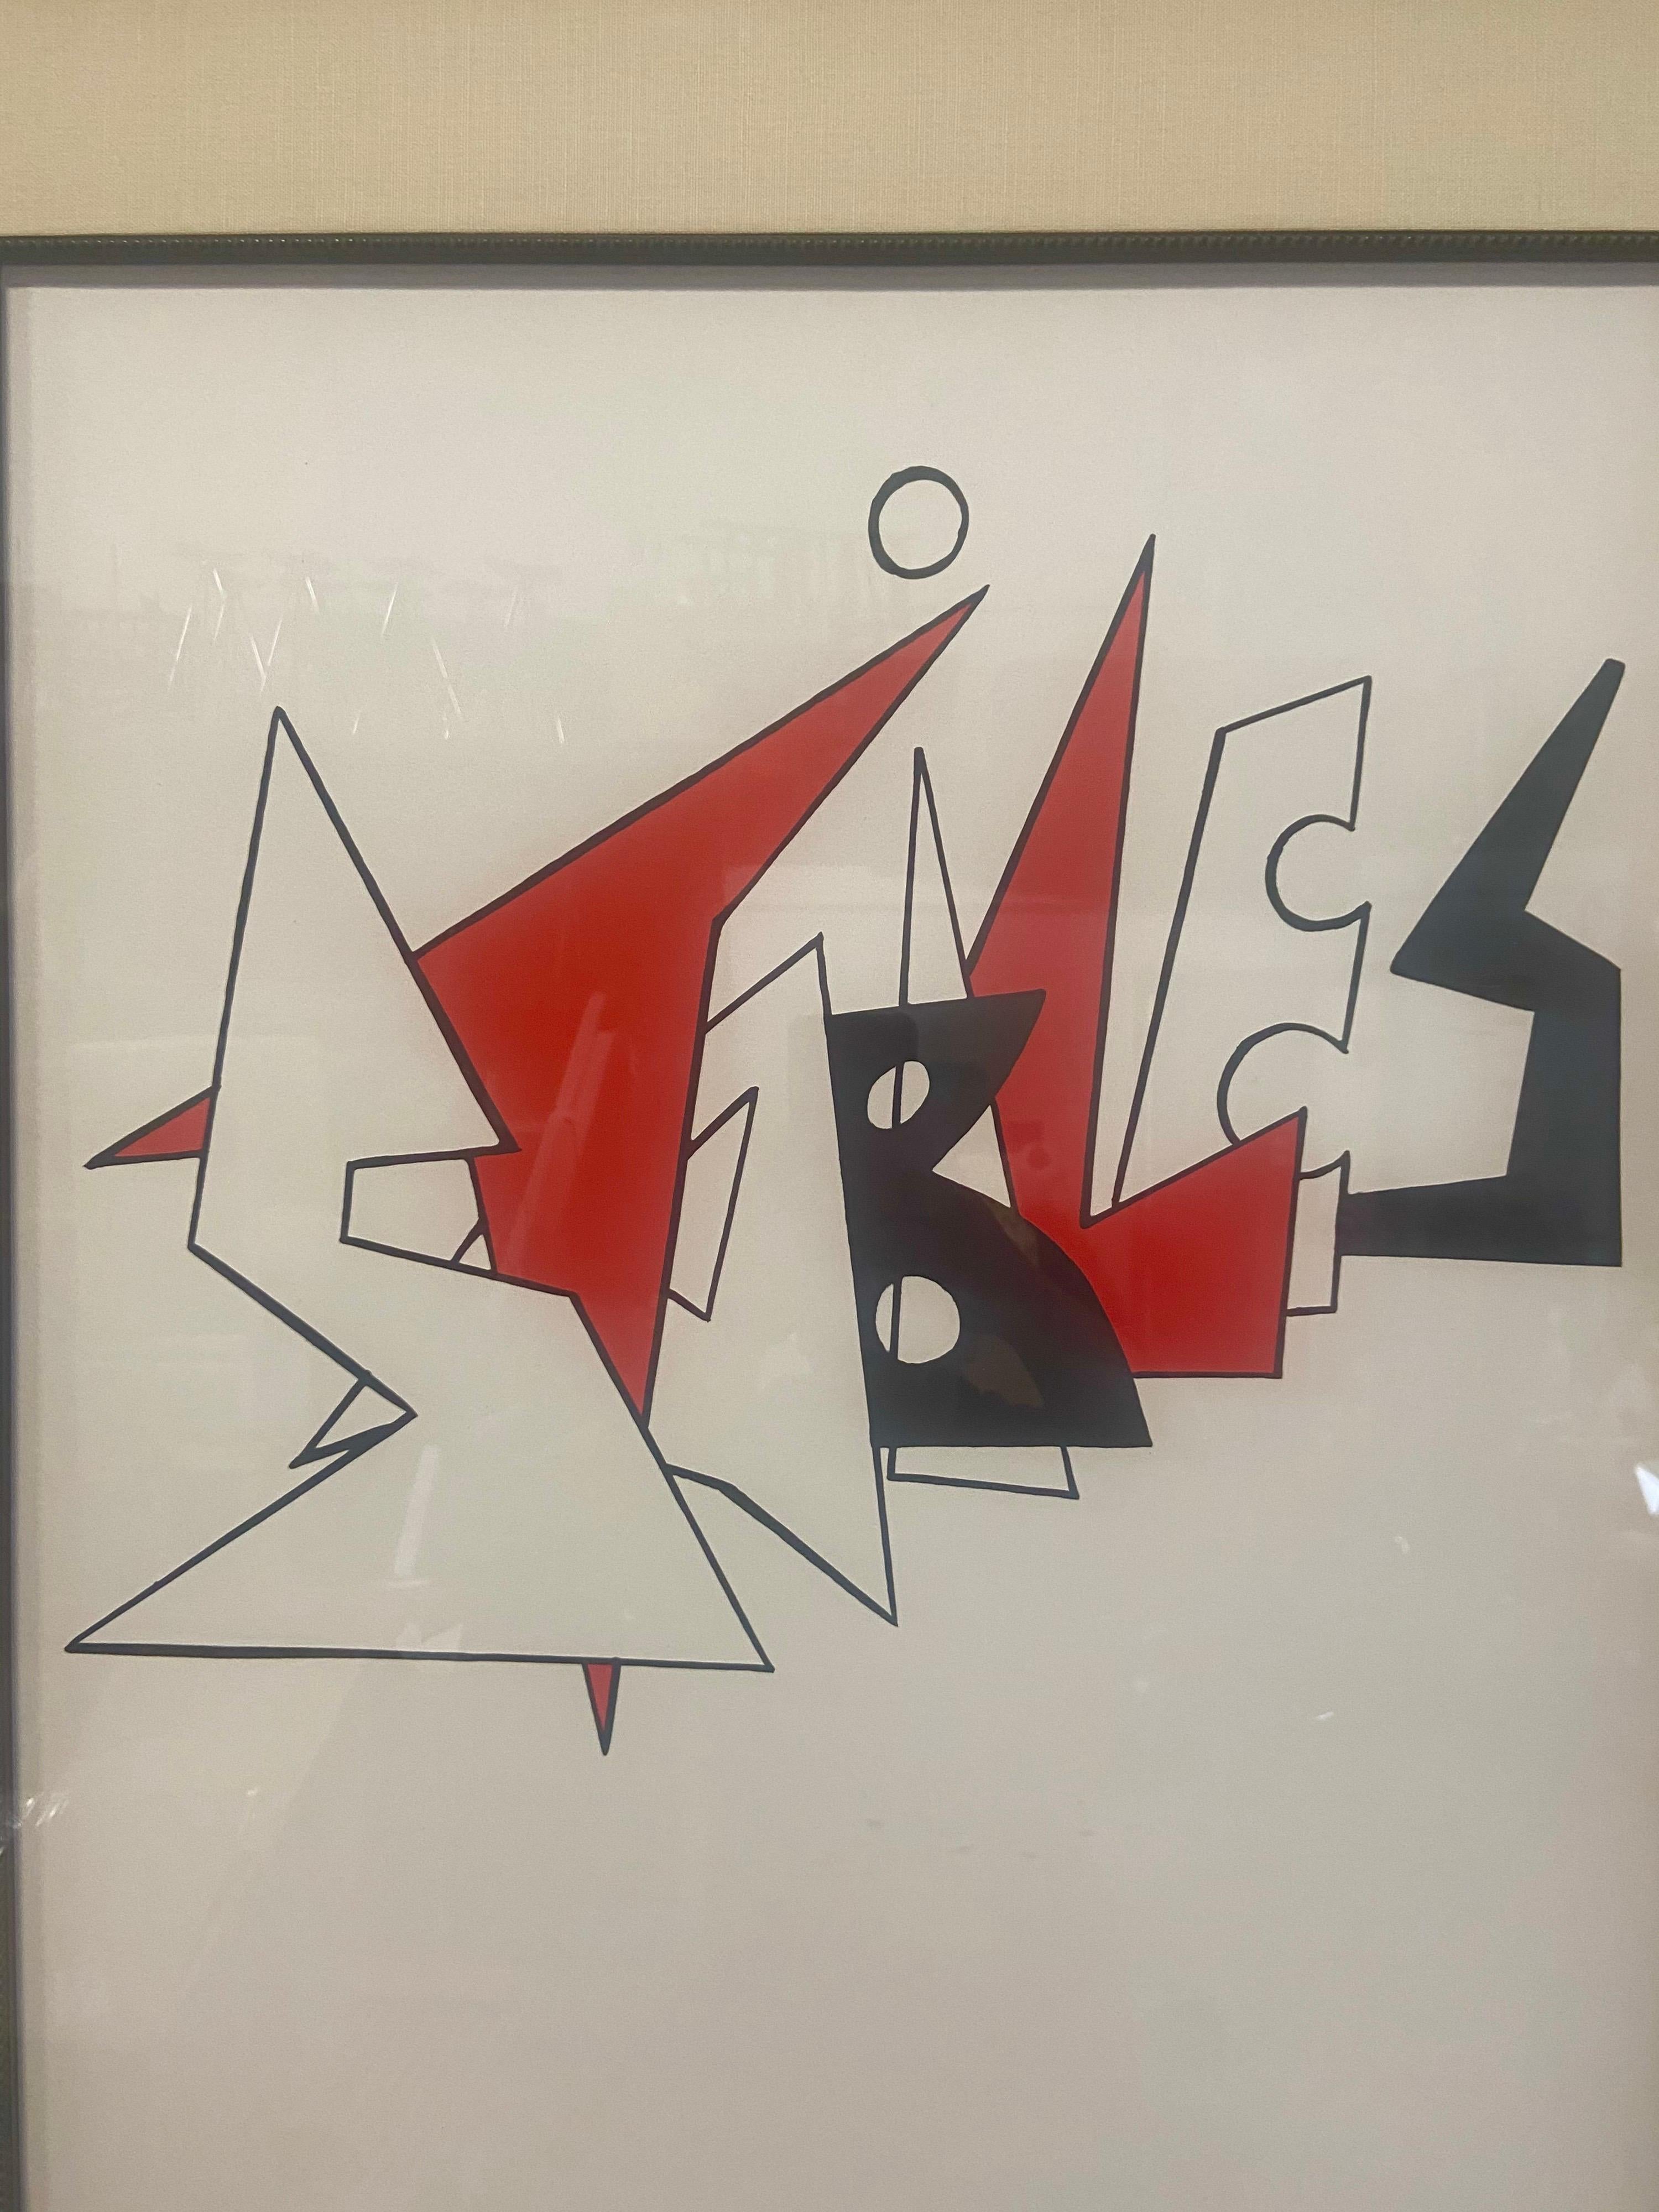 Near mint artwork by Calder with the colors bright and vibrant.

Title “Grand Stabiles” from 1962. Publisher Margot, Paris.

The frame is 32 1/2 inches wide 39 inches high. The lithograph is 20 1/2 inches wide by 27 inches high. Hand signed and